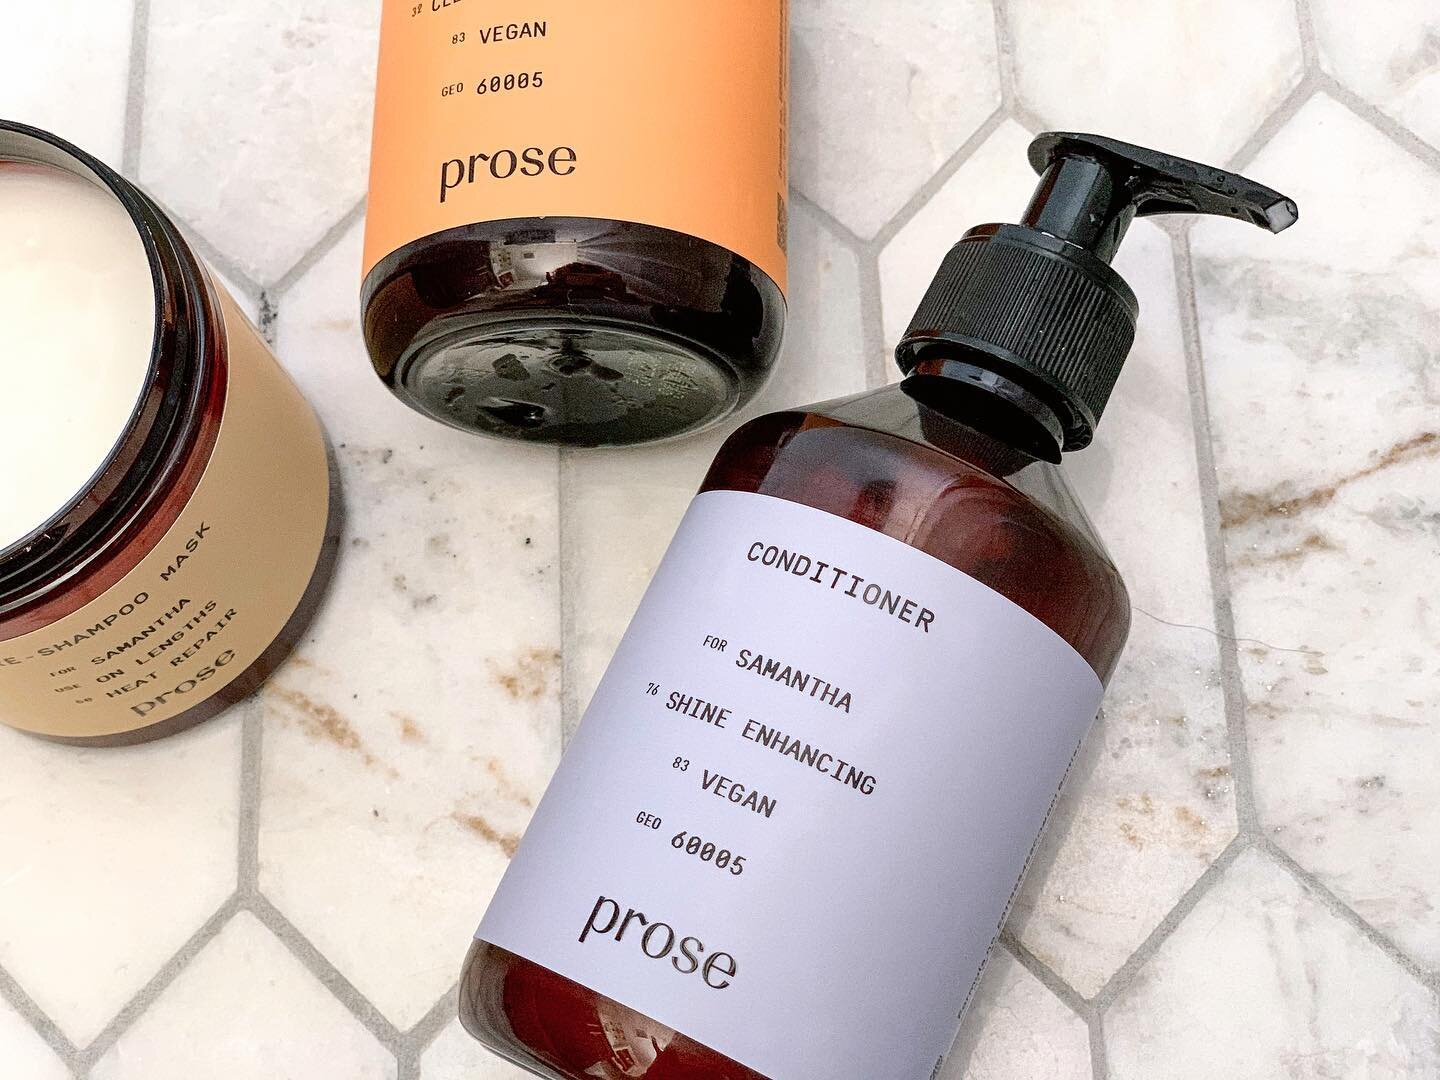 HAIR WITH PROSE 🪄
OK. My hair has been in a relationship with @prose for the past month. Preshampoo, shampoo, conditioner: the works. Working on a blog post, but HAD to give you a peek at how I&rsquo;m feeling about it. Swipe to see how my mane look